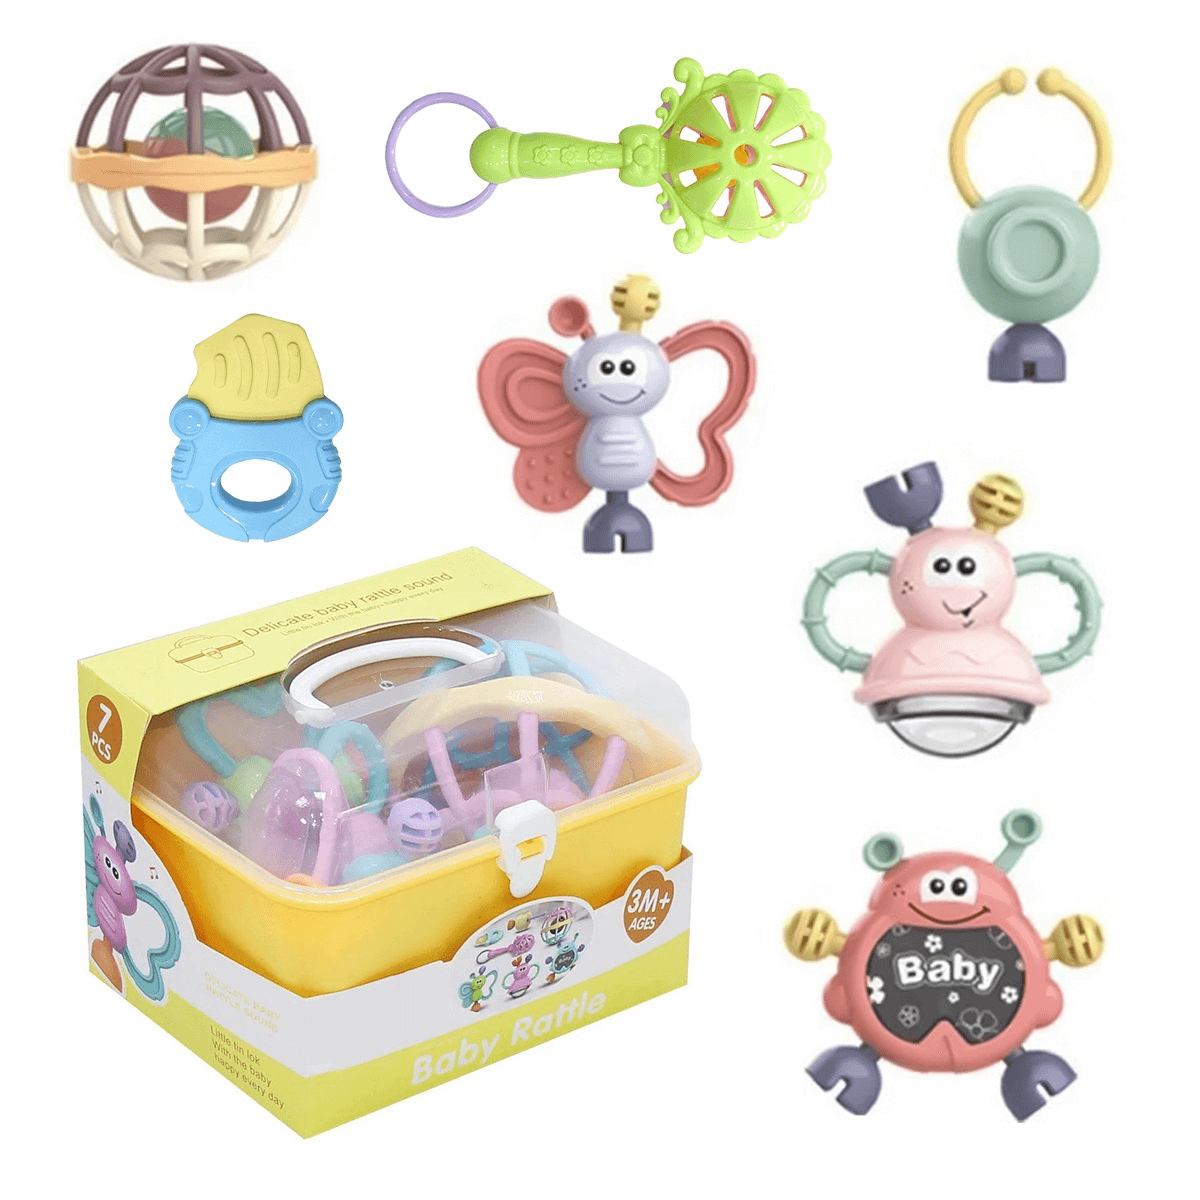 Baby Rattle Toys Set Box With Different Shapes & Assorted Colors